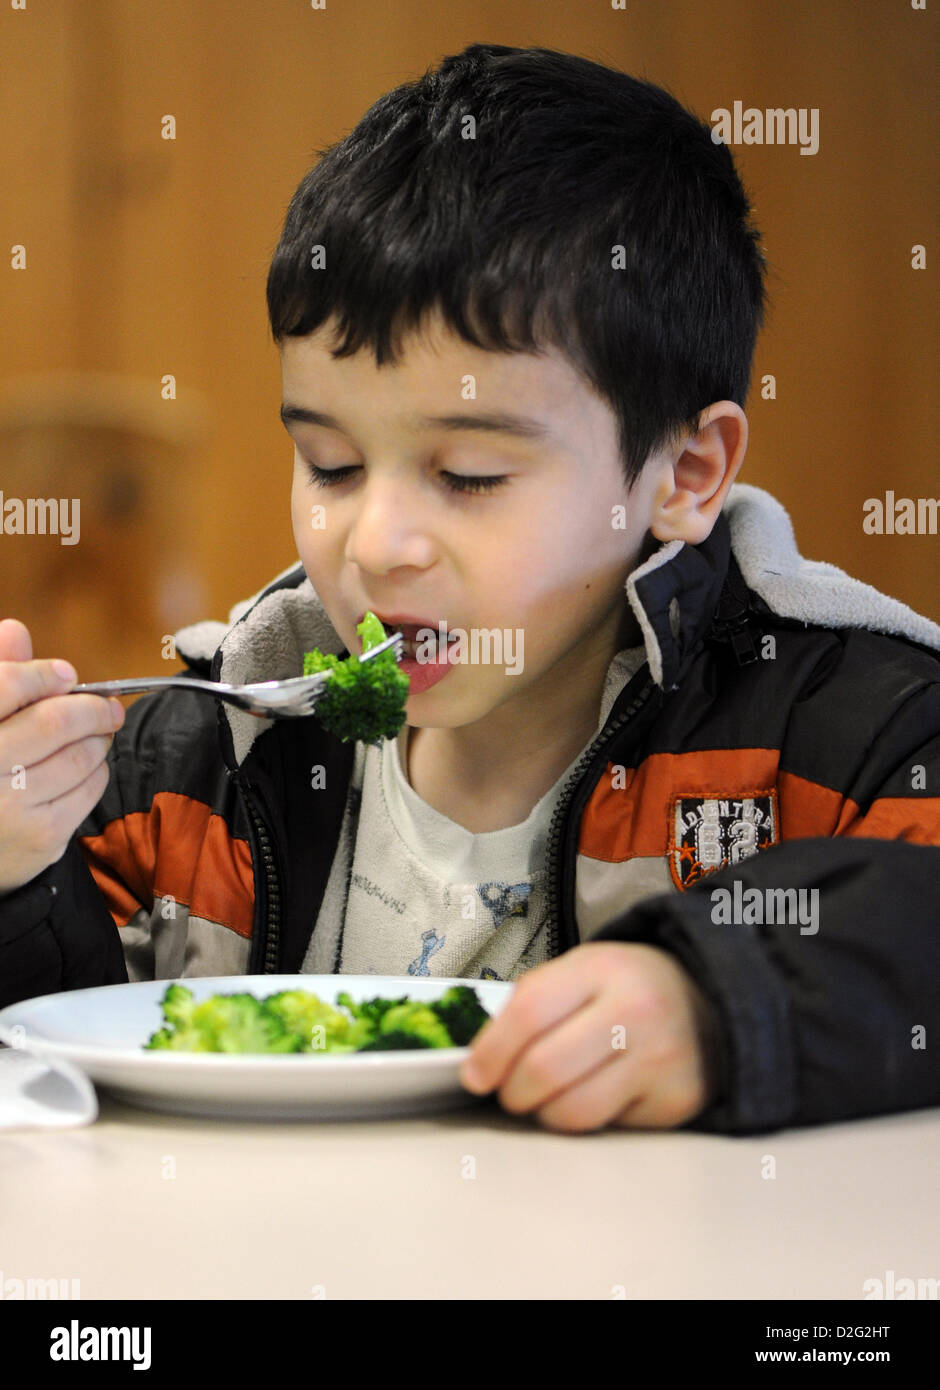 Kuersat Iltas eats broccoli at the Hospital for Paediatrics and Adolescent Medicine in Dortmund, Germany, 23 January 2013. The Research Institute for Child Nutrition presented a new children's menu for hospitals. Photo: Caroline Seidel Stock Photo